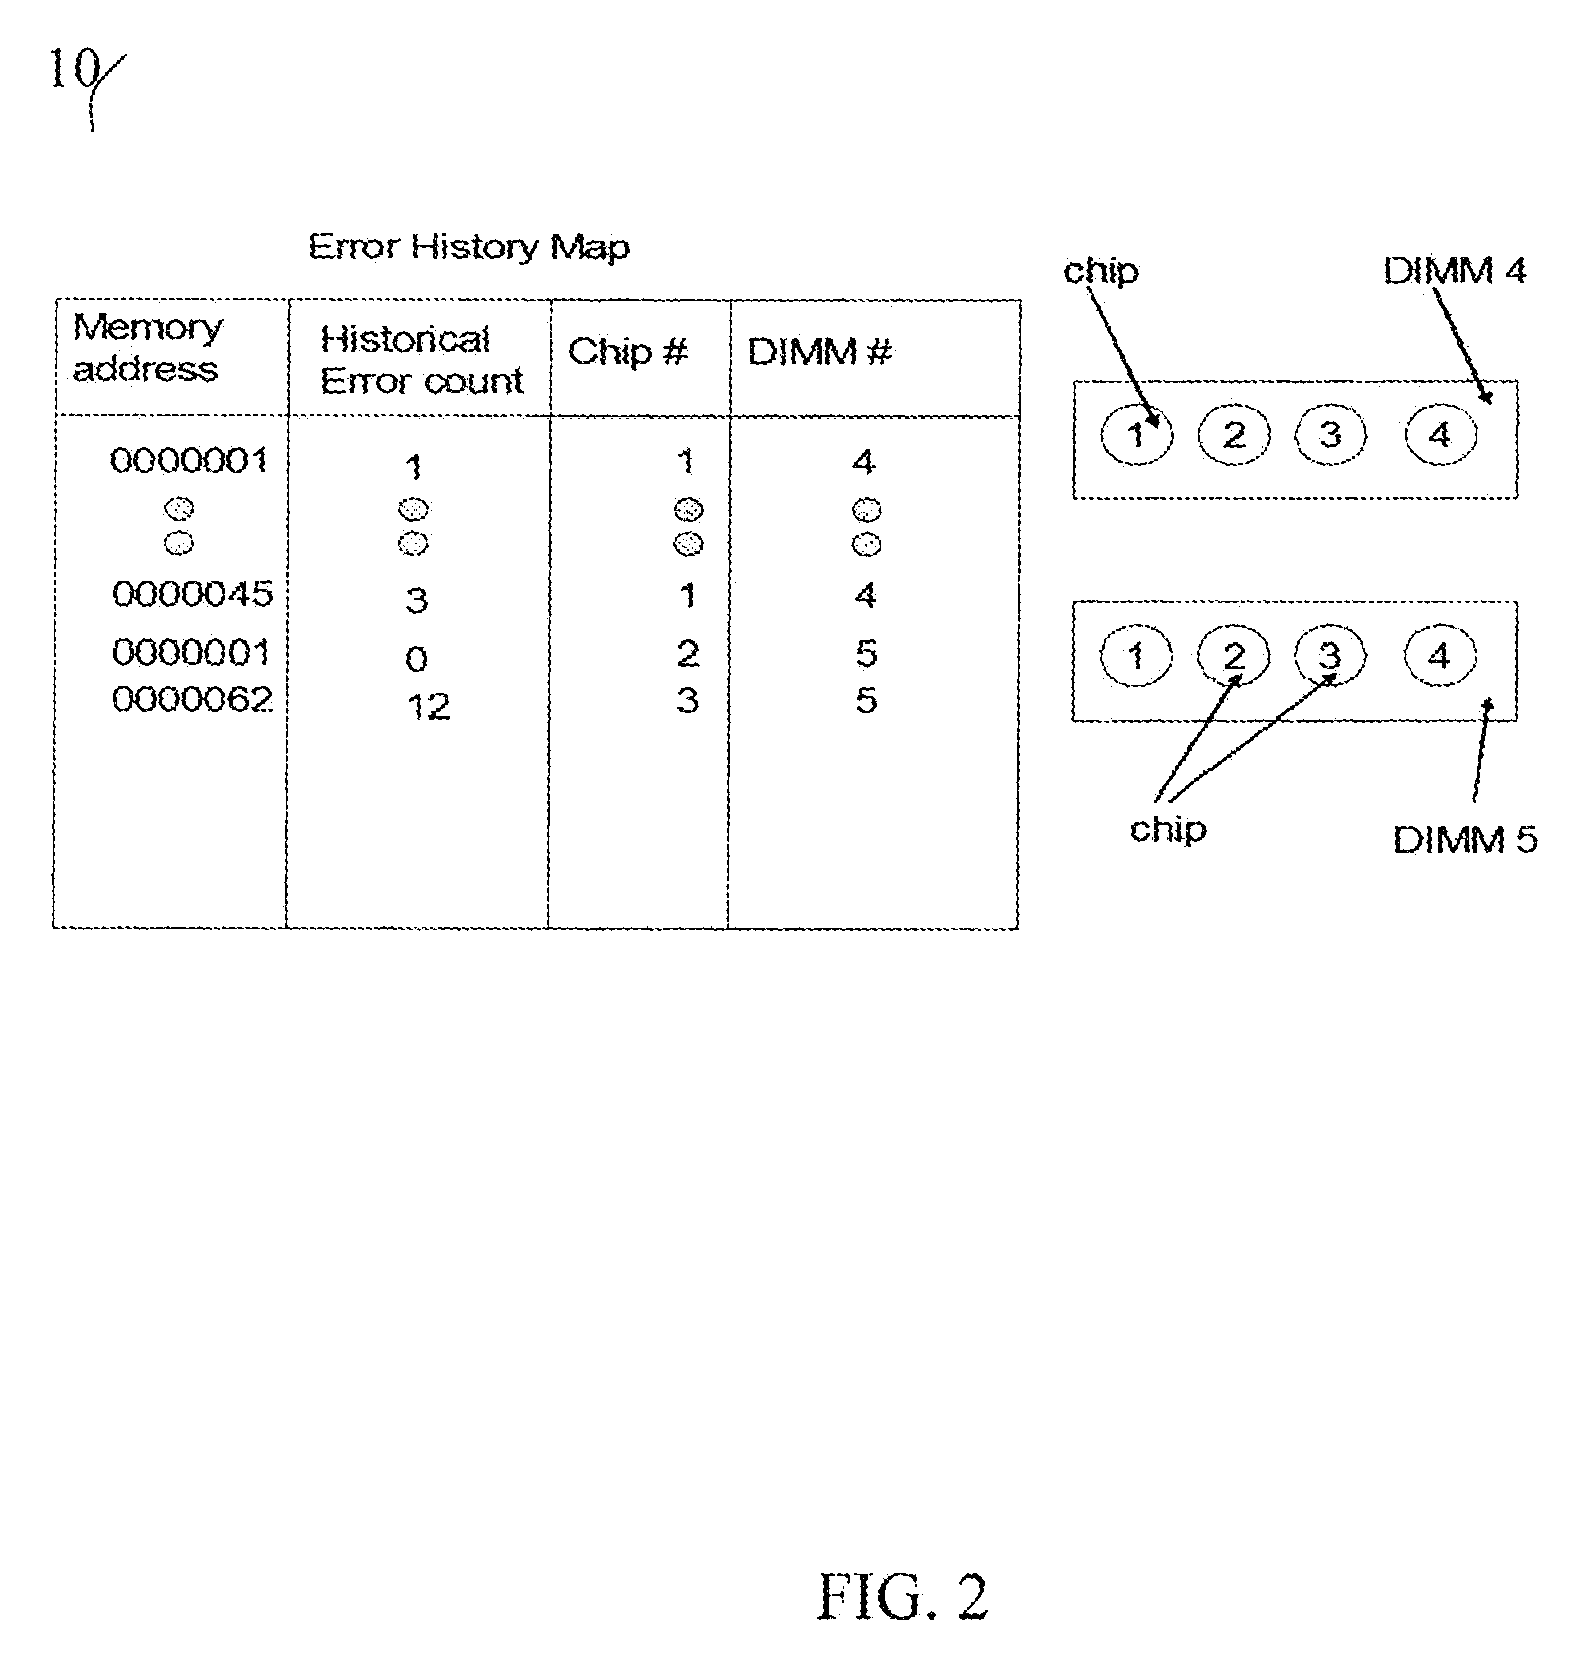 Method and system for enterprise memory management of memory modules